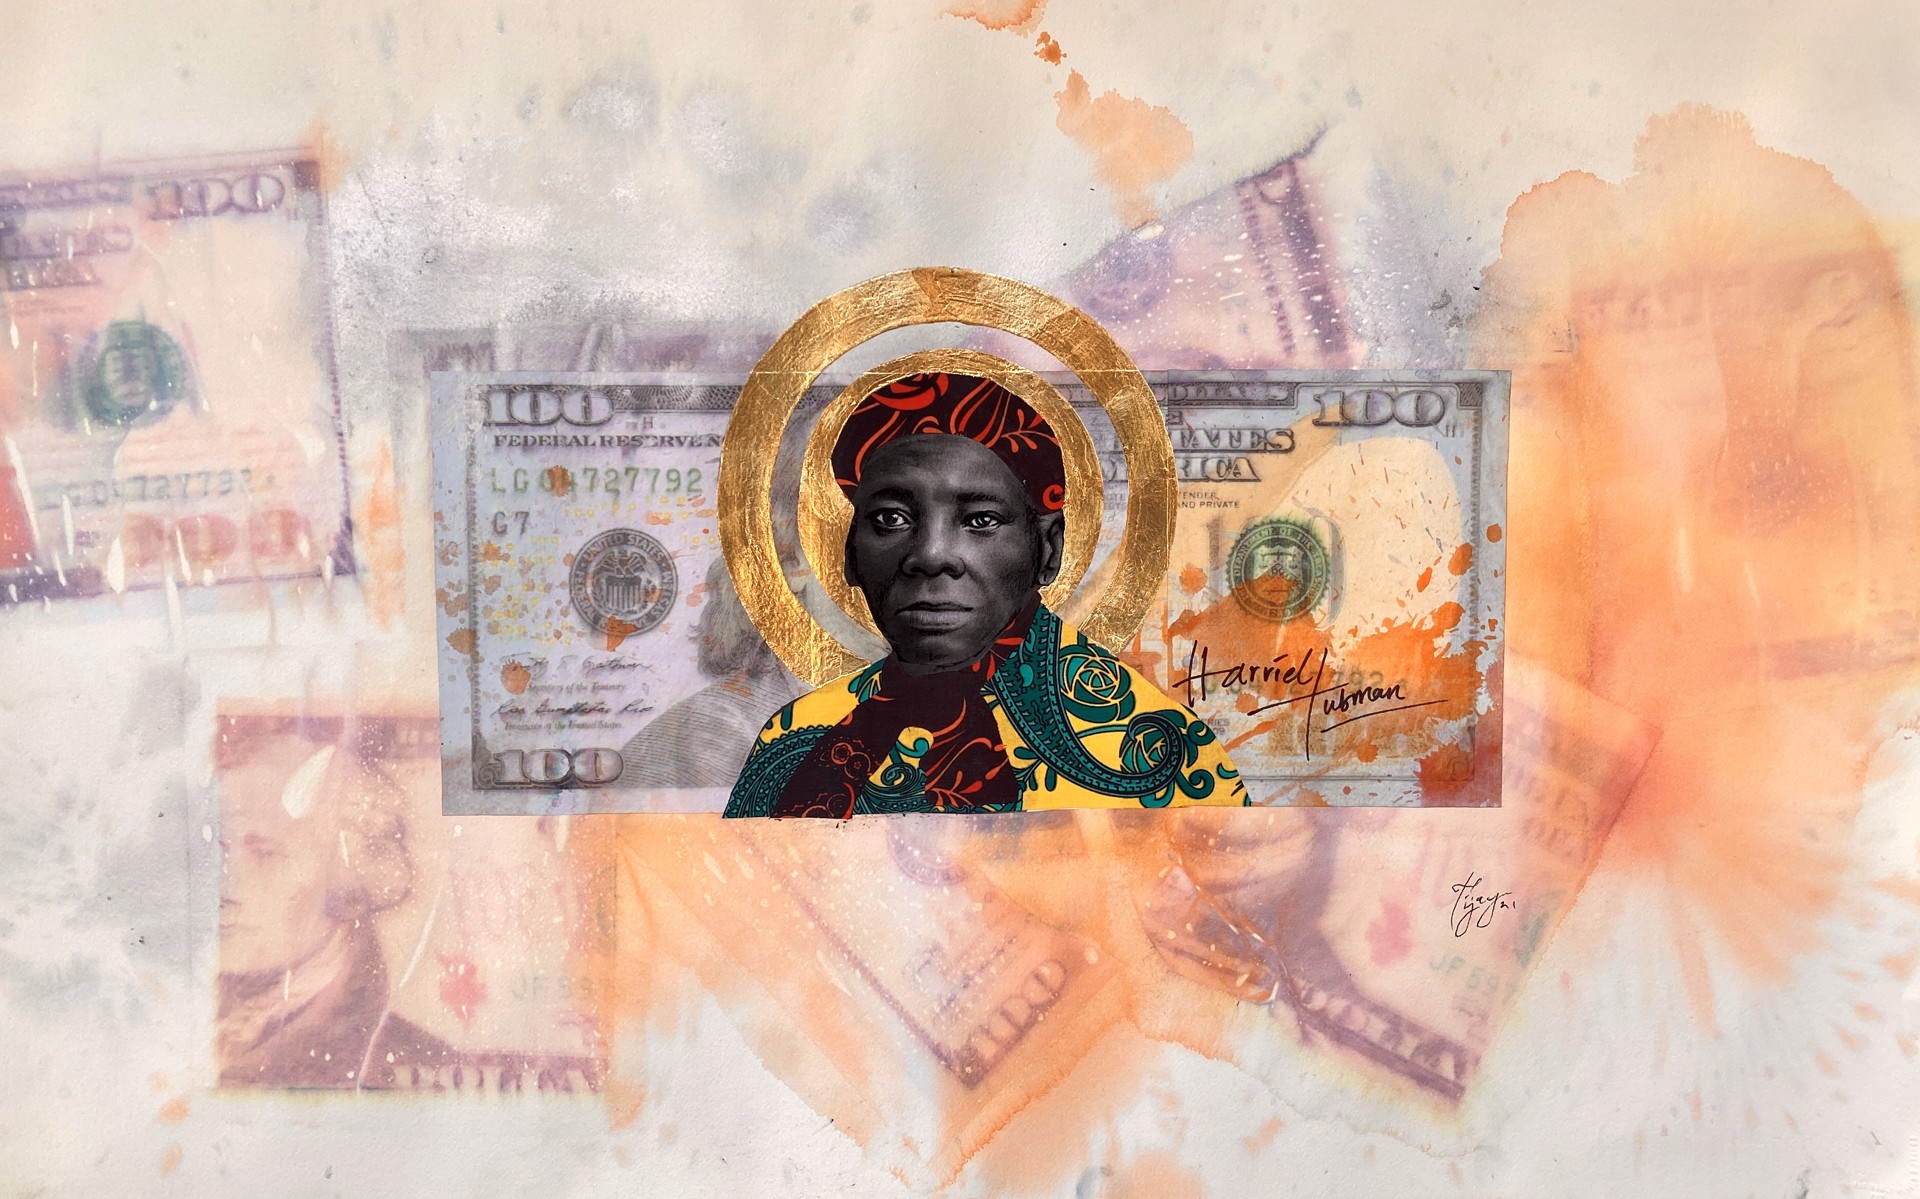 Harriet Tubman 2 by Tijay Mohammed